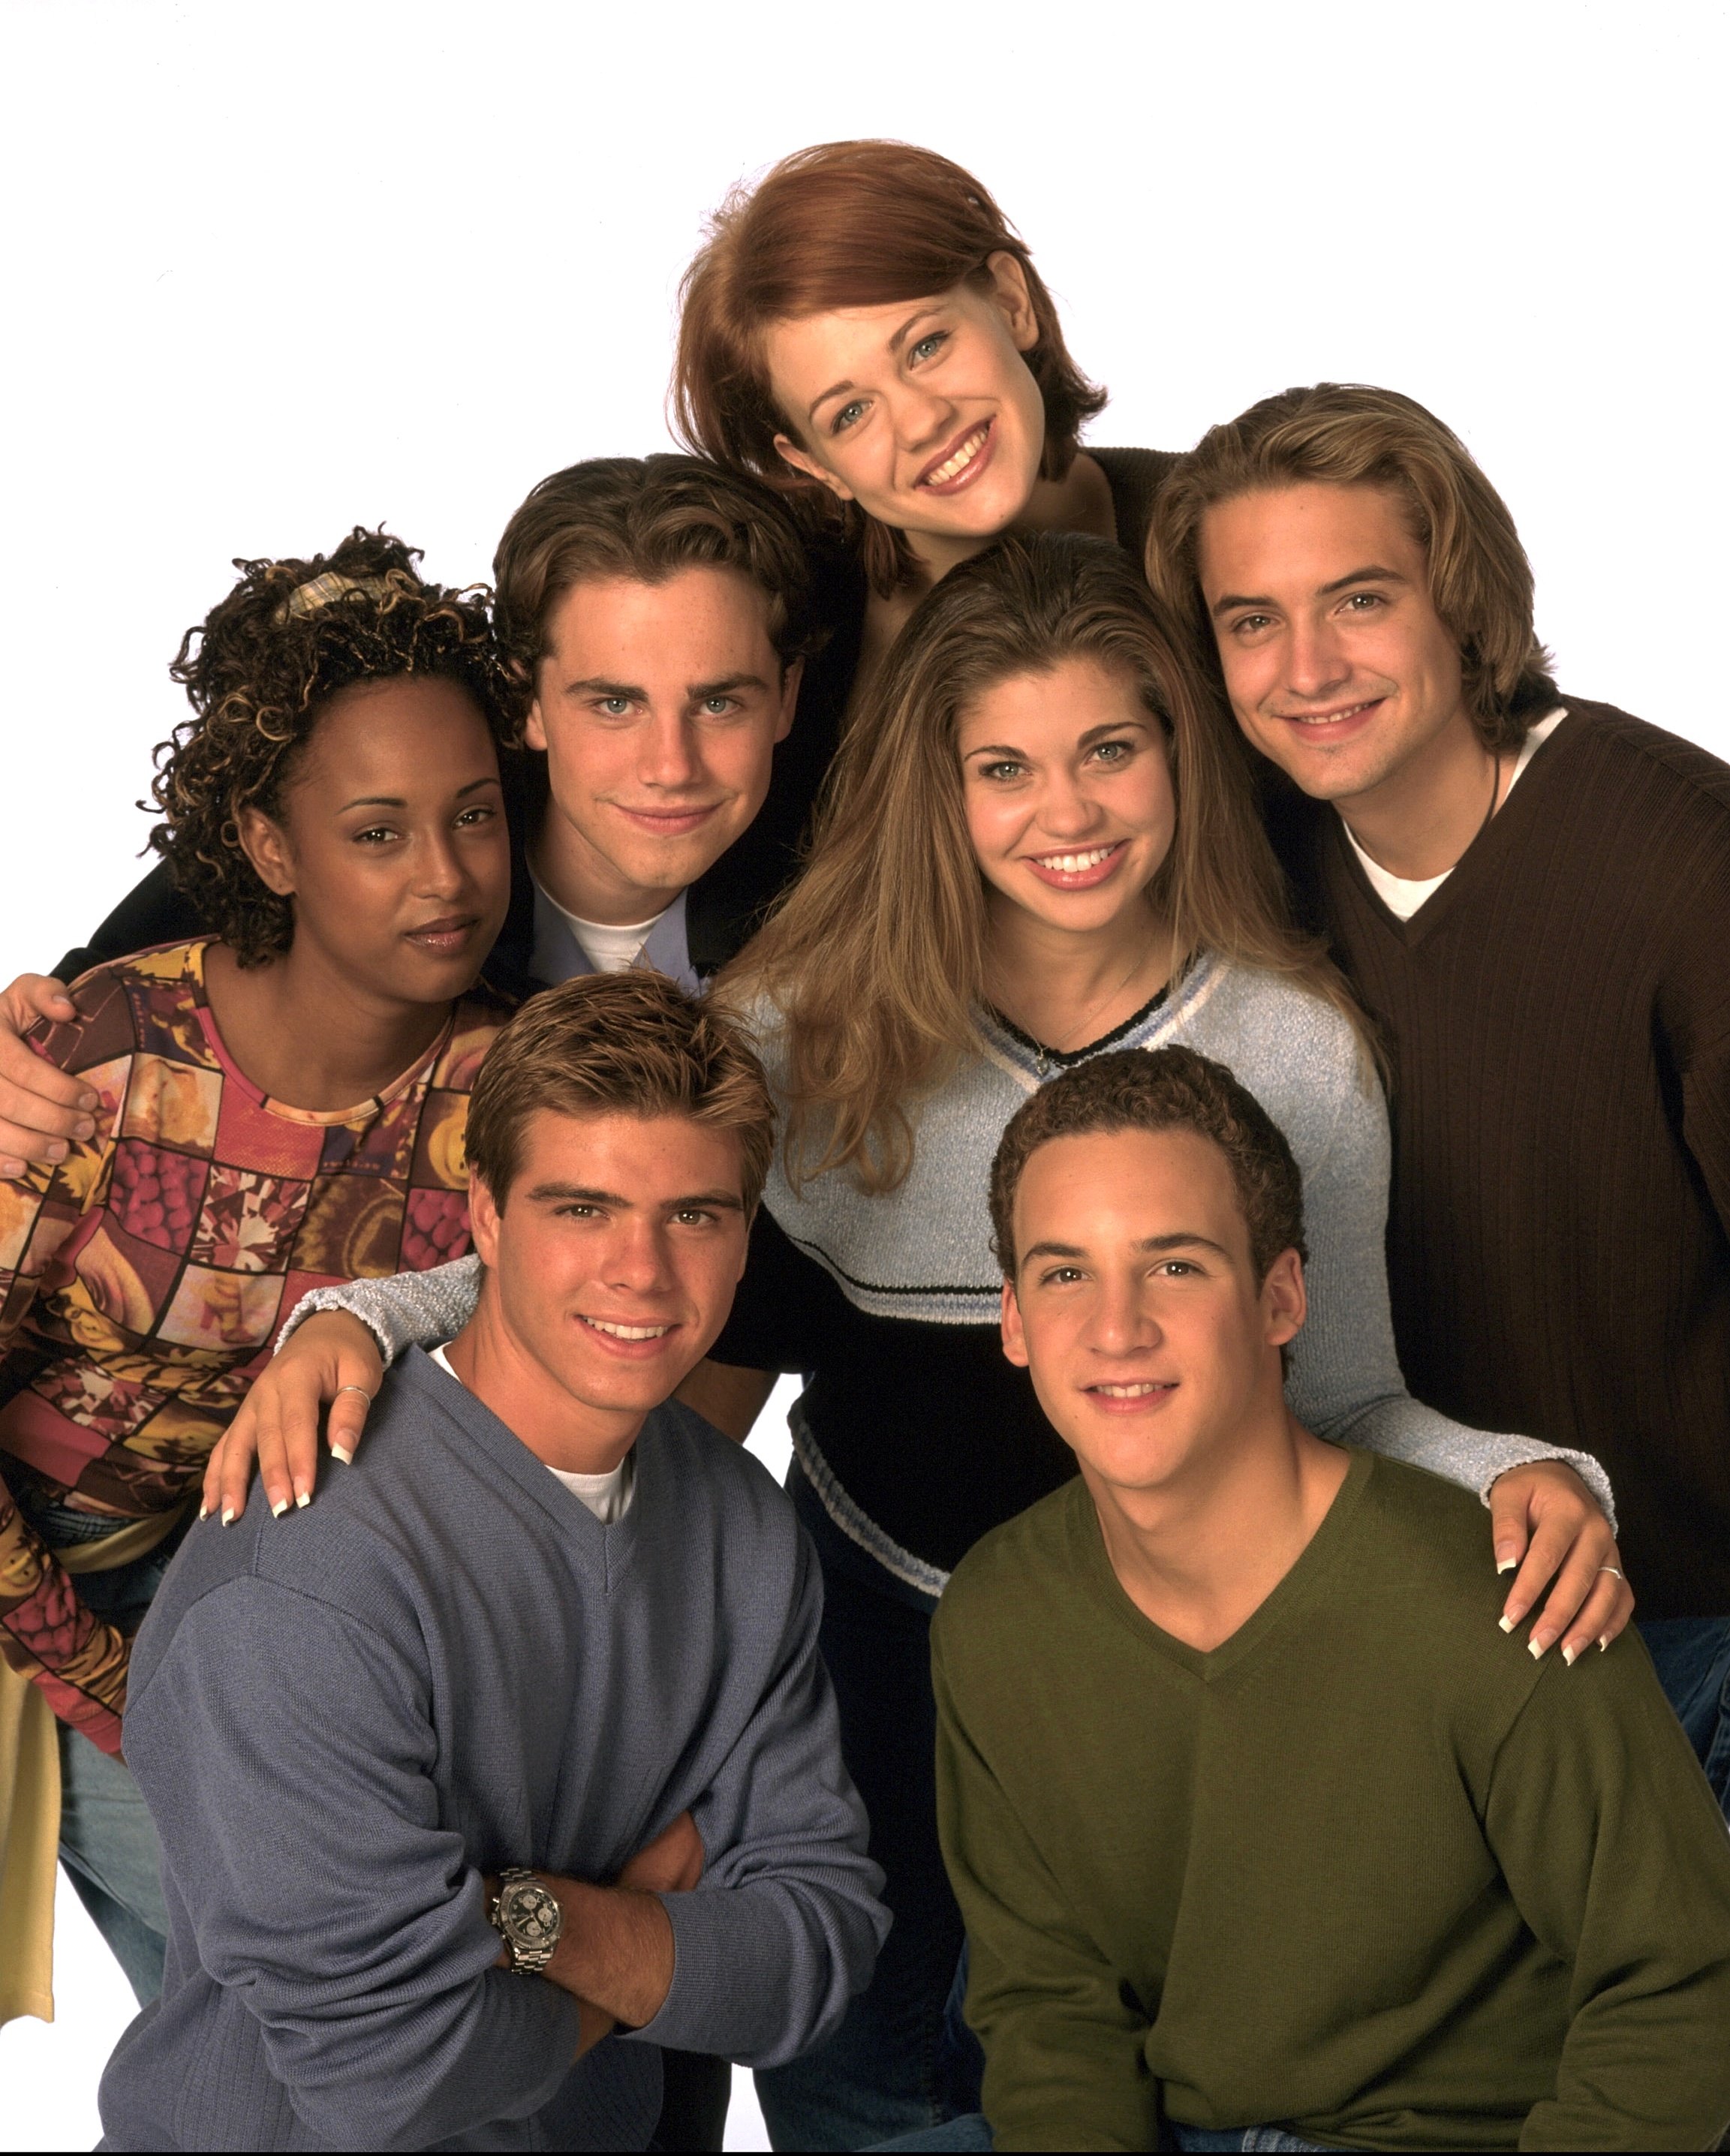 Matthew Lawrence, Ben Savage; (rear, l-r) Trina McGee-Davis, Rider Strong, Maitland Ward, Danielle Fishel and Will Friedle for "Boy Meets World" circa 1998. | Source: Getty Images